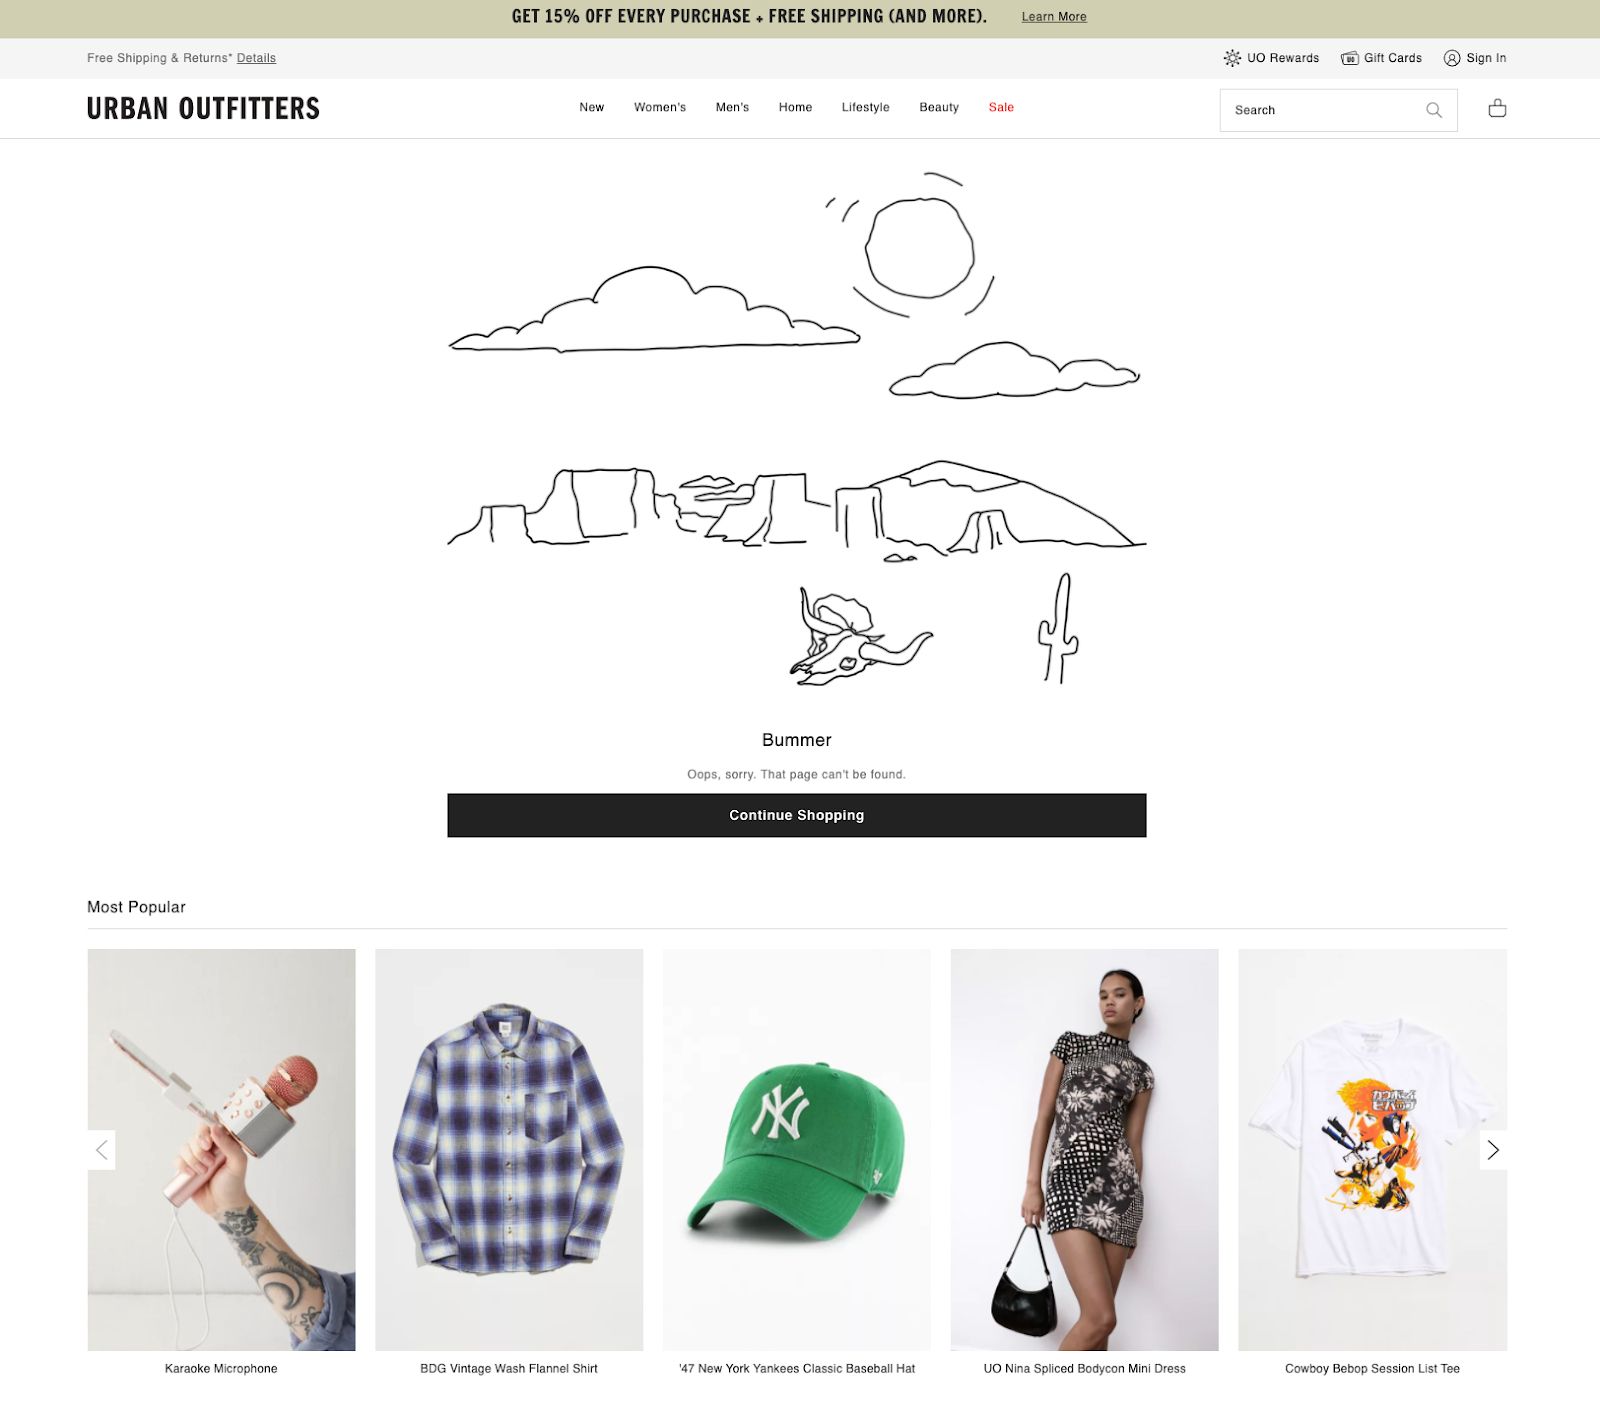 Urban Outfitters 404 example for ecommerce